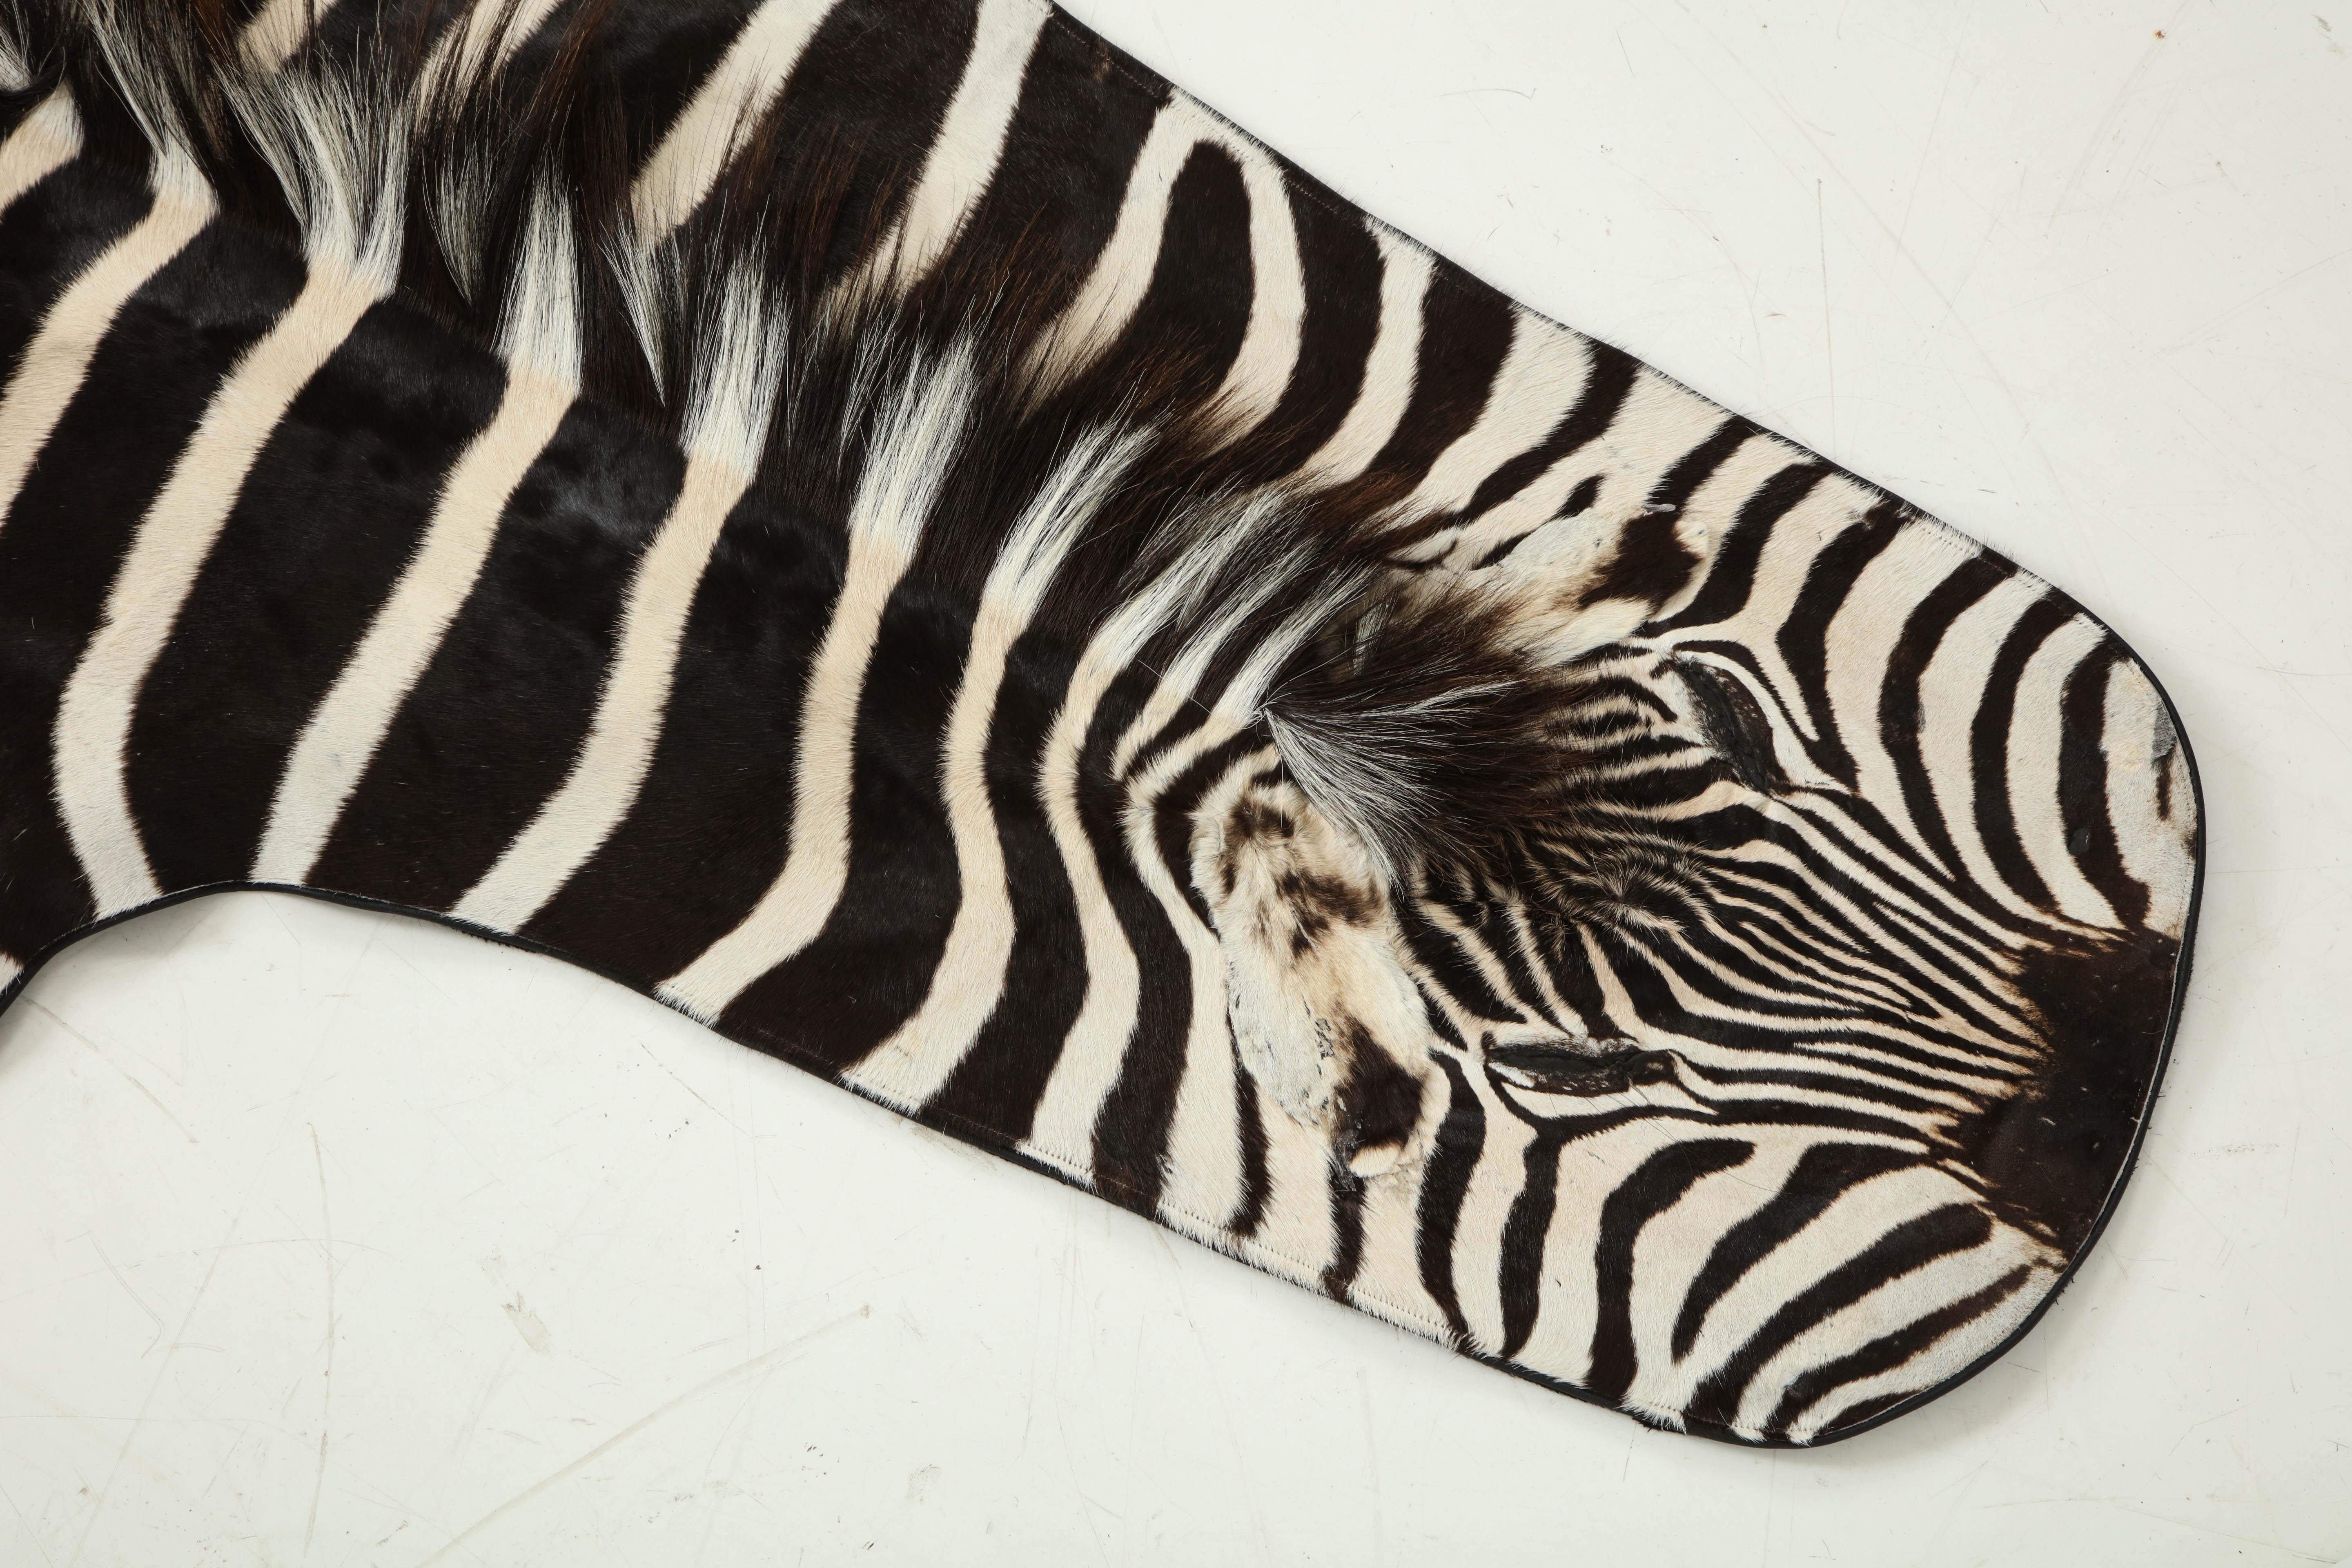 Decorative zebra hide rug. Trimmed with leather all around the edges and backed with wool fabric.